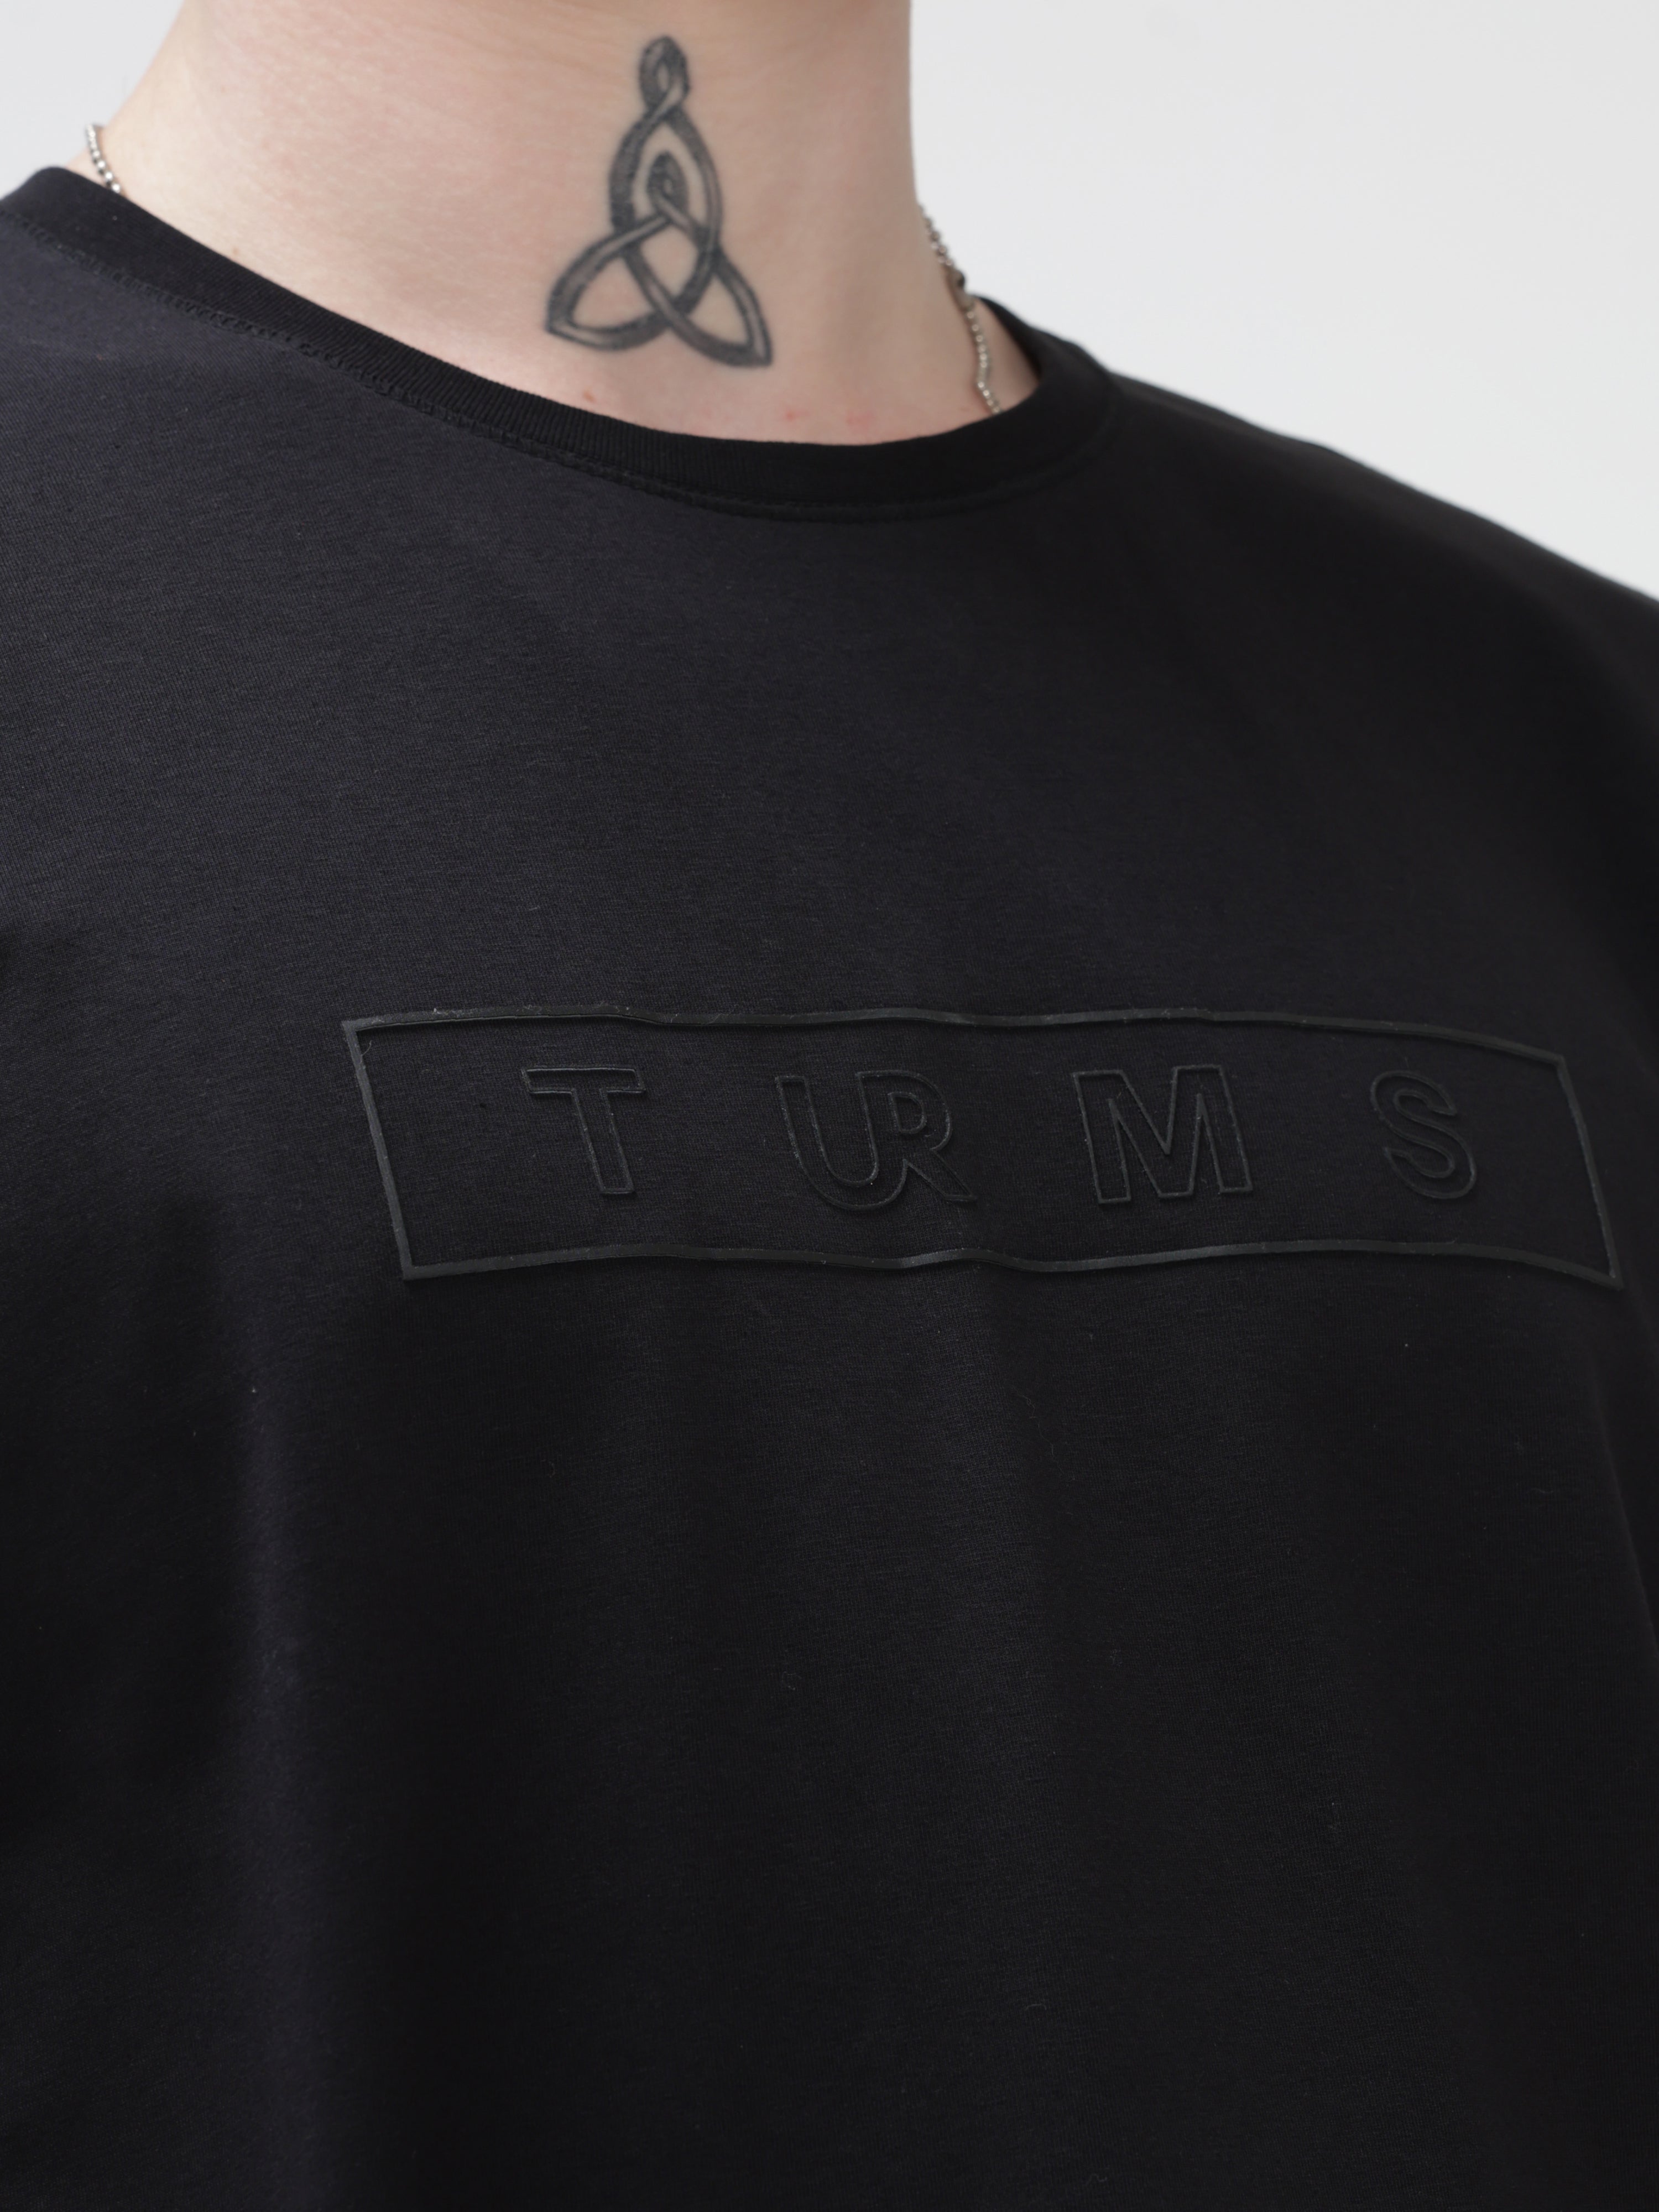 Black round-neck Turms T-shirt with anti-stain, anti-odor features, and embroidered logo. Stretchable and trending intelligent apparel.